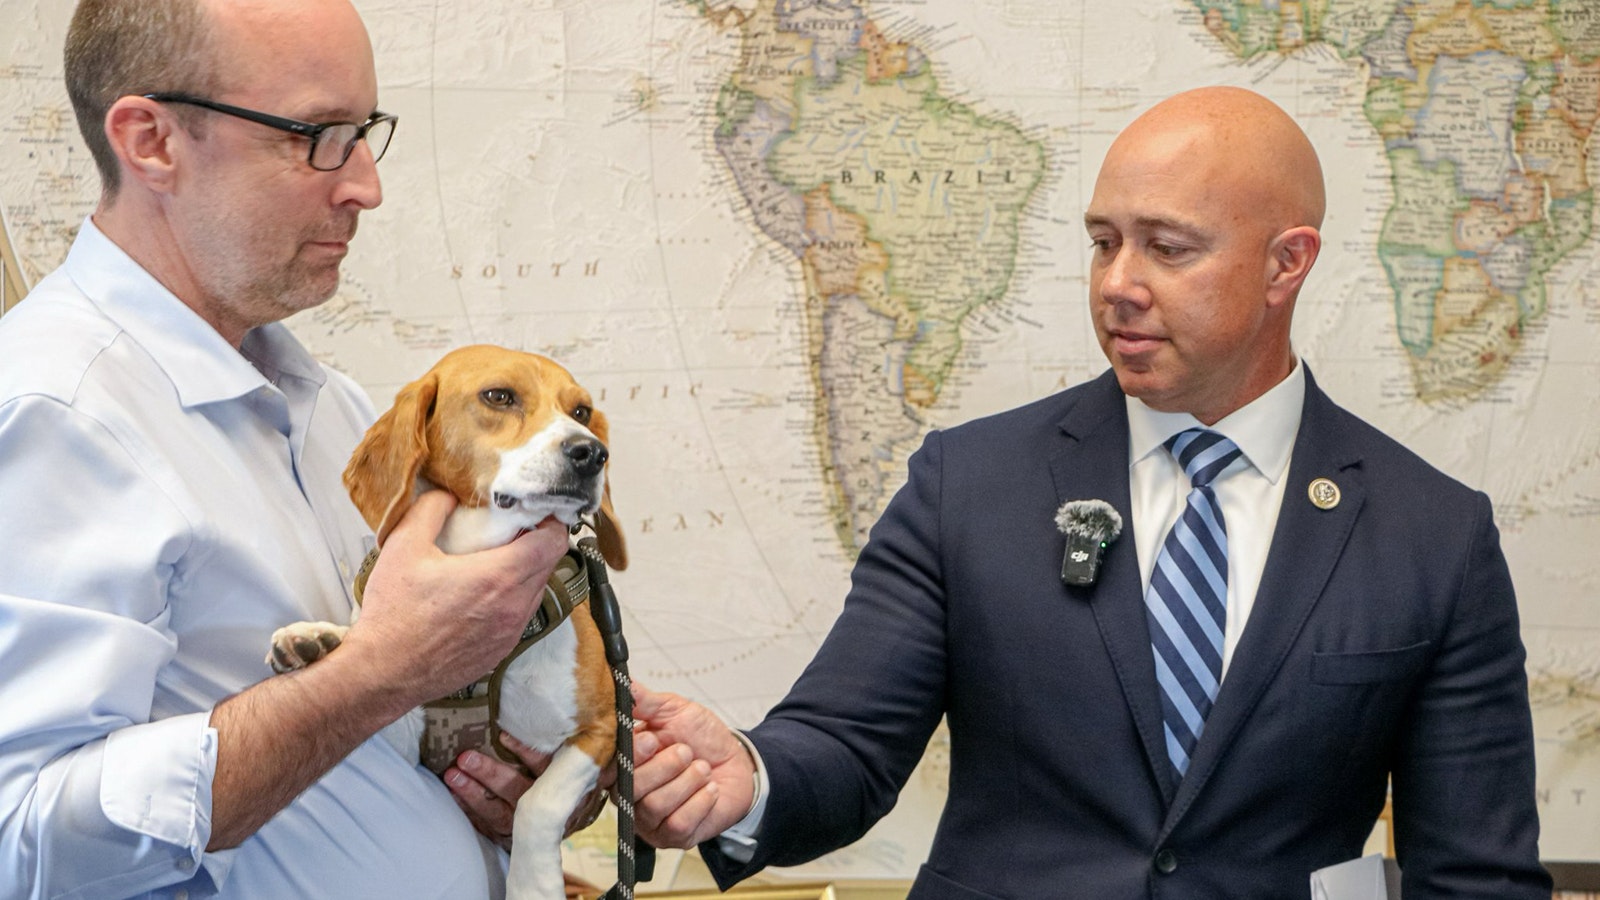 During his visit, Uno and Kindness Ranch Executive John Ramer visit Florida Republican Congressman Brian Mast, who has been an outspoken advocate against animal testing.